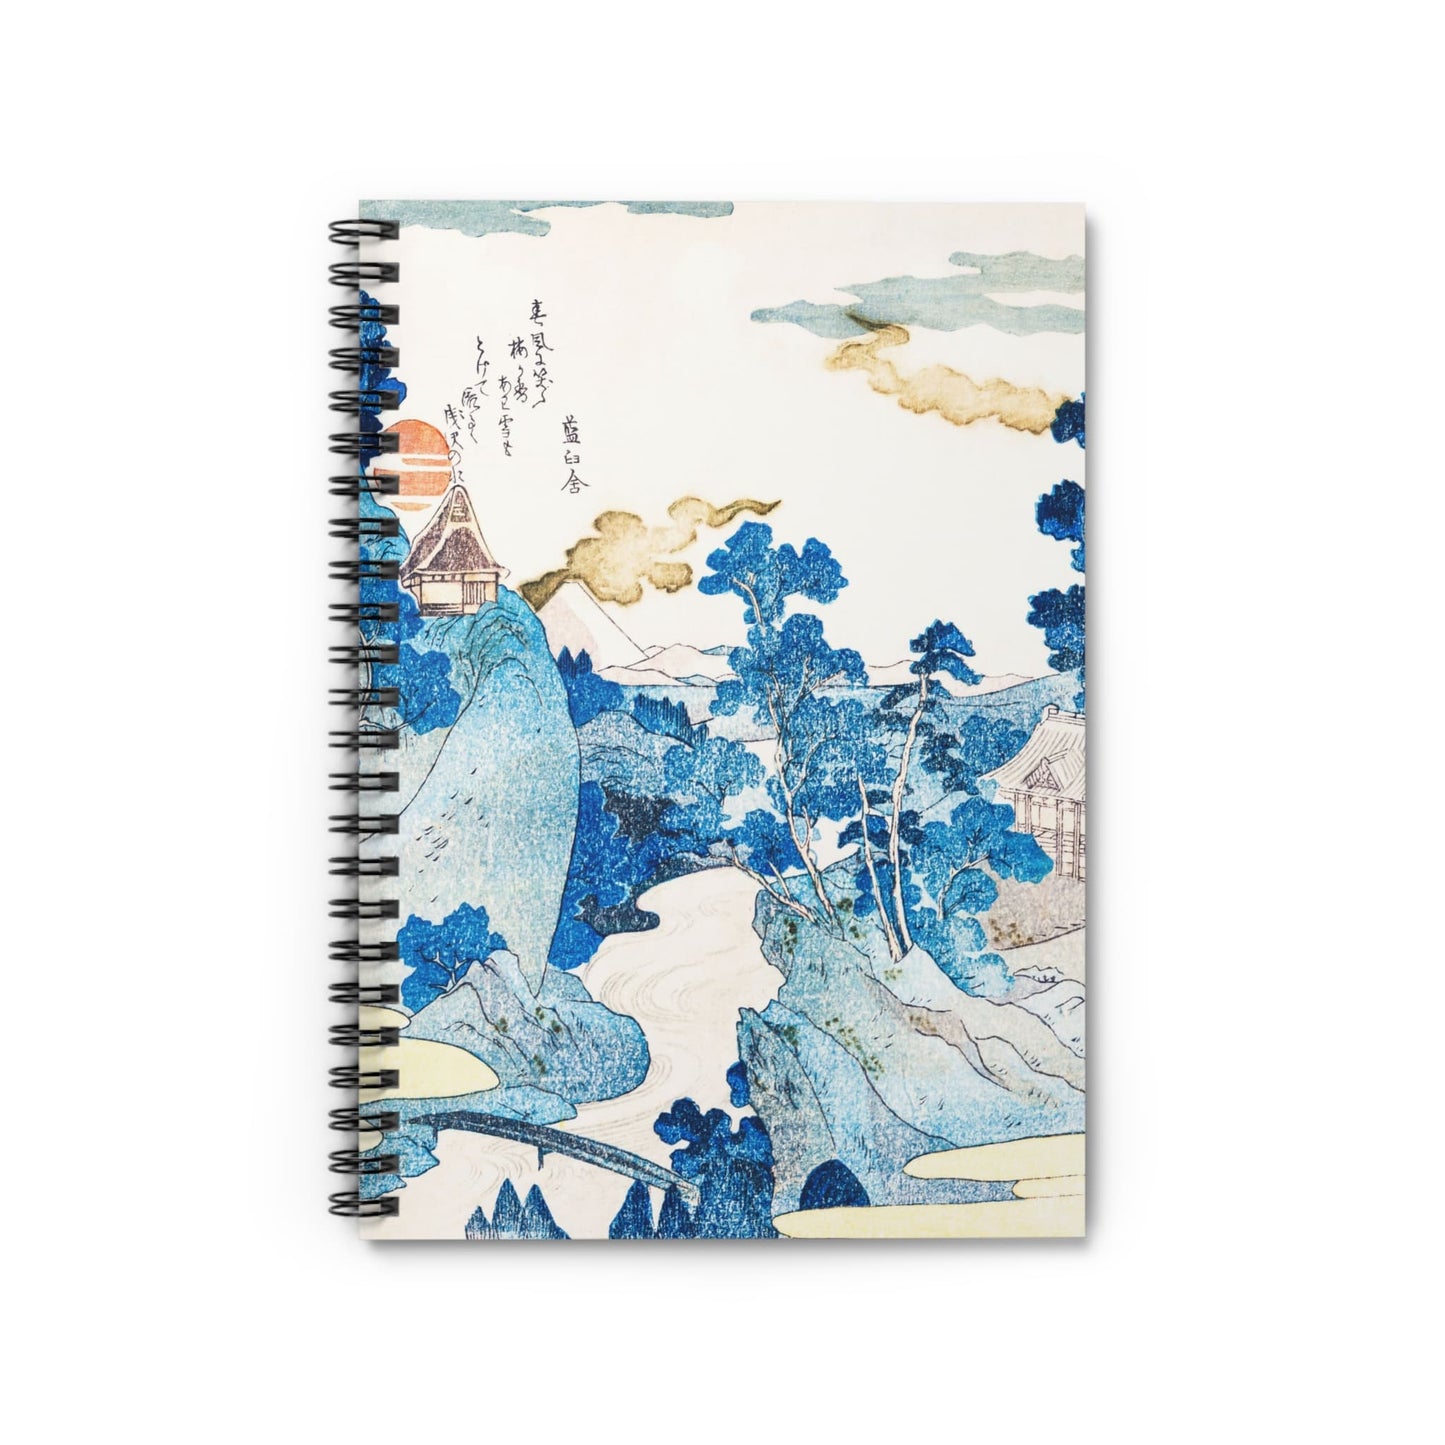 Japanese Notebook with blue mountains cover, ideal for journals and planners, showcasing beautiful blue mountain landscapes.